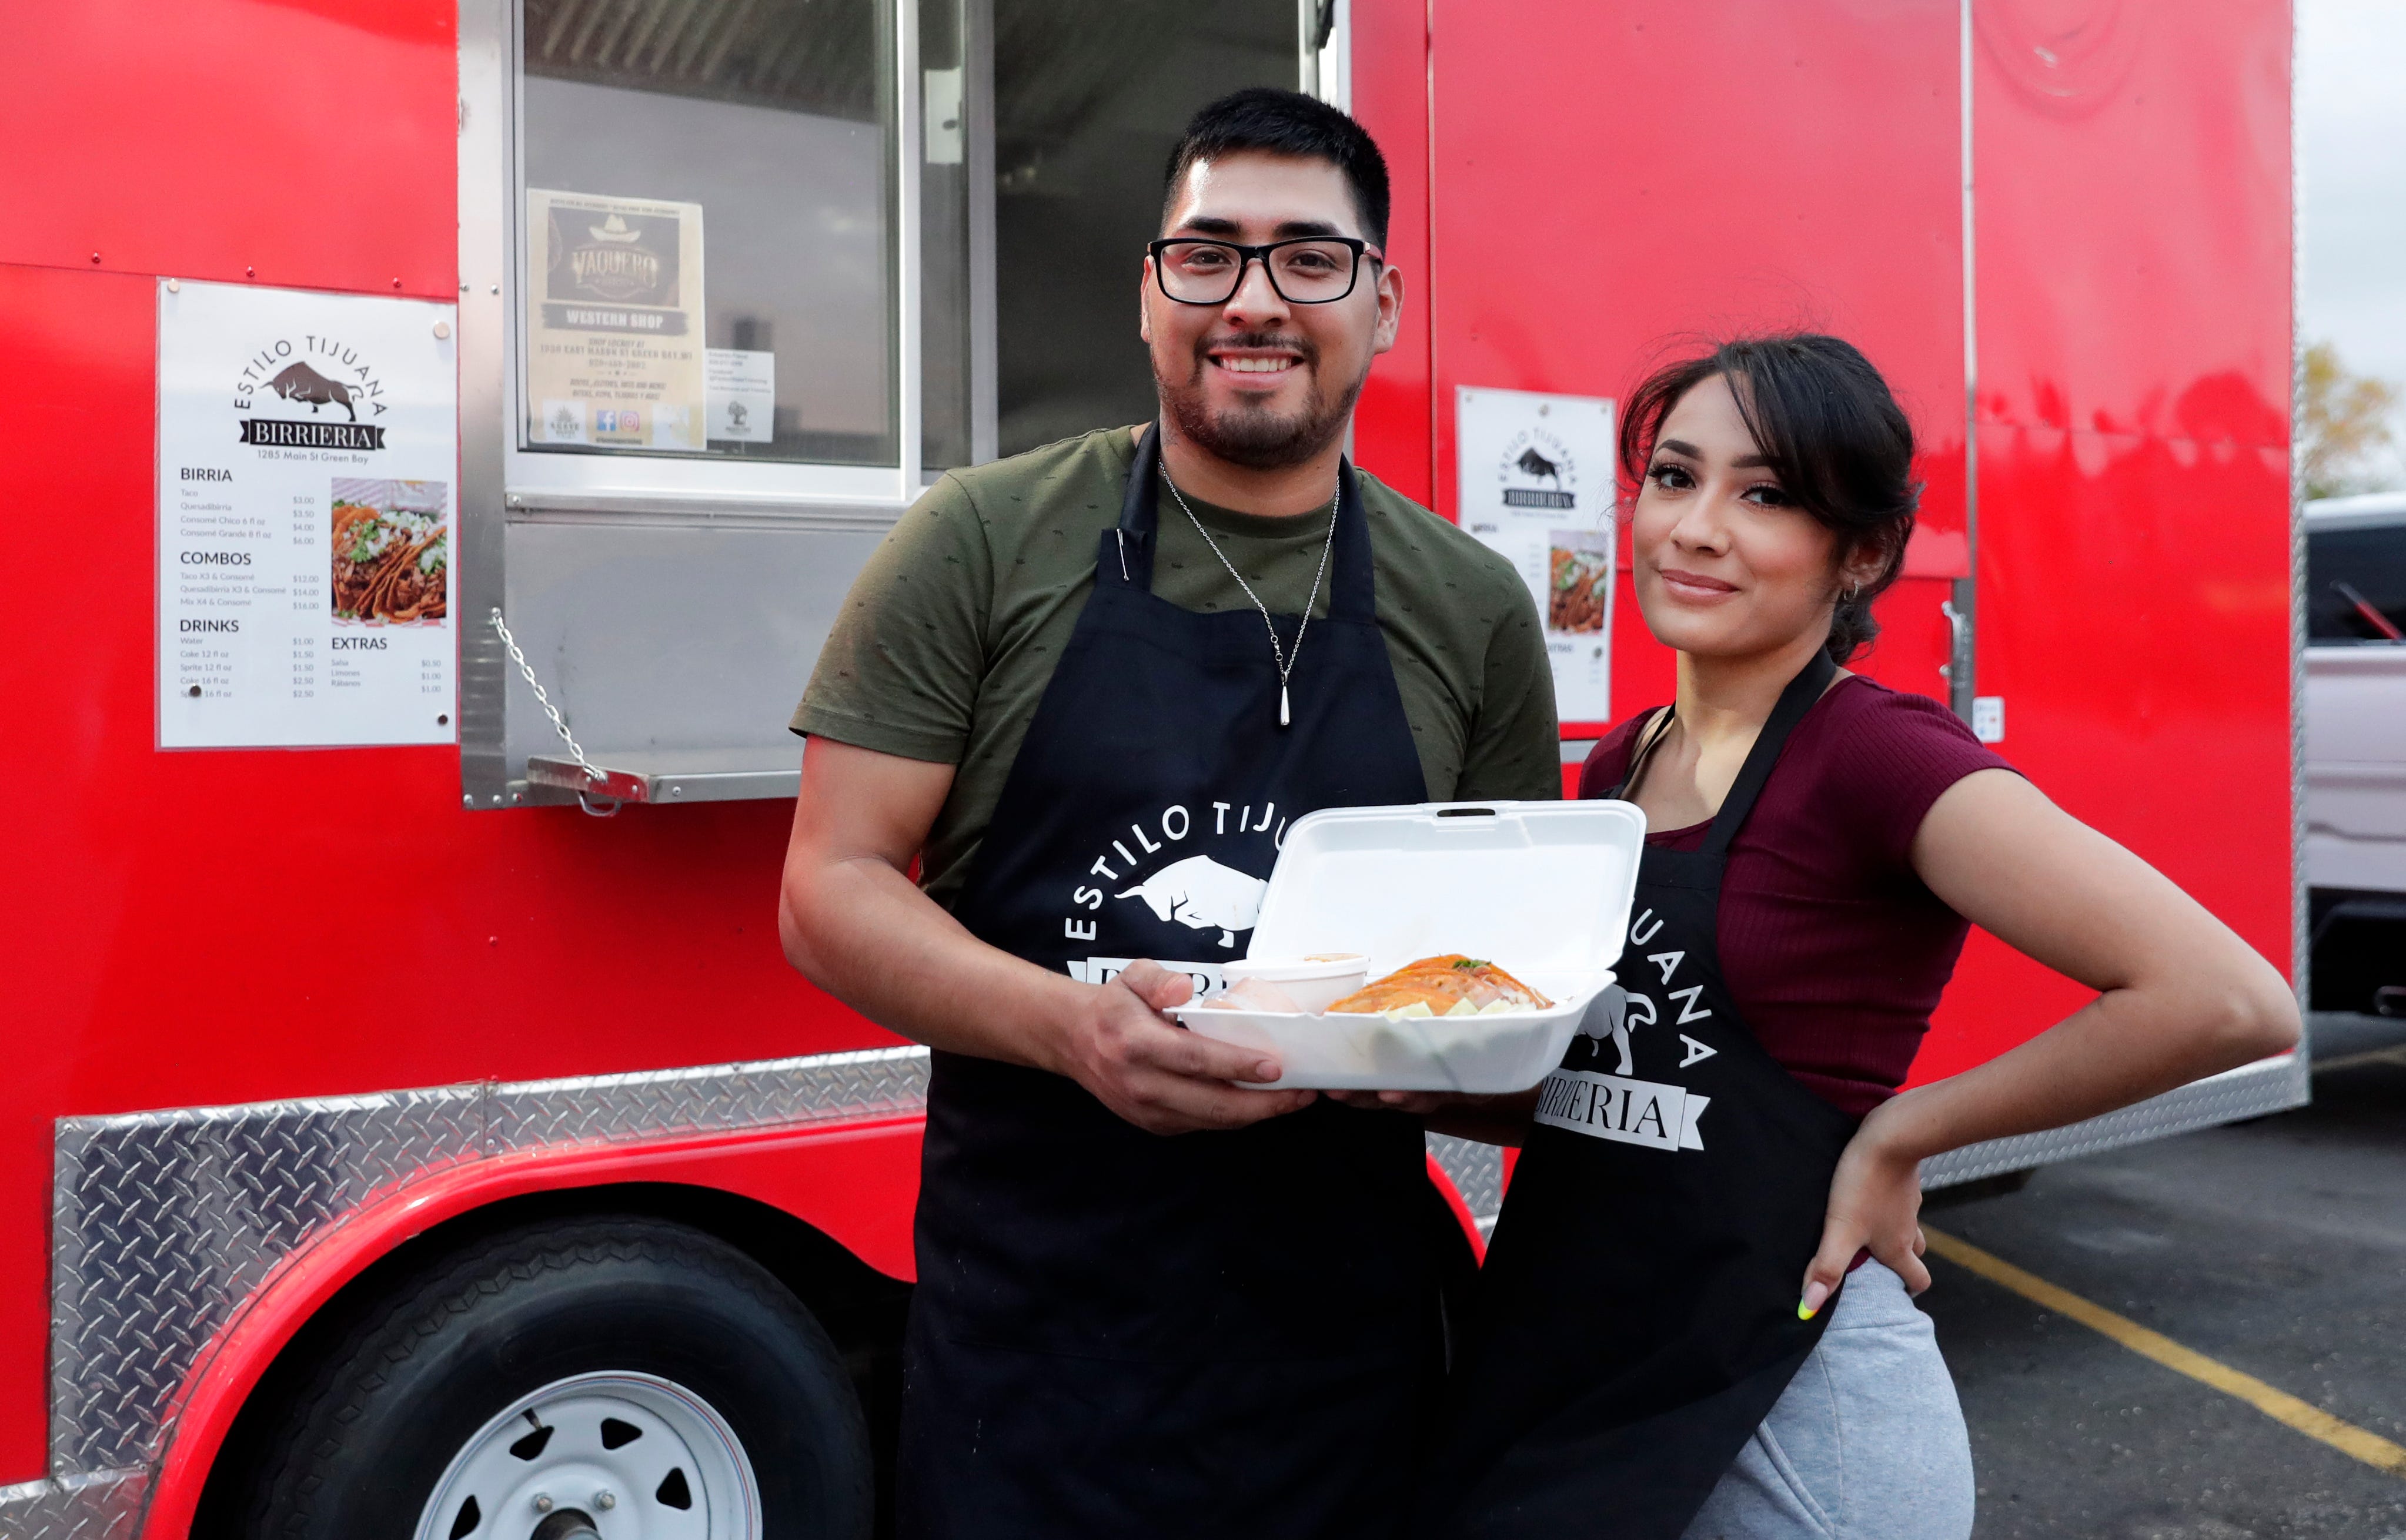 New food truck specializes in Birria Tacos with family secret recipe